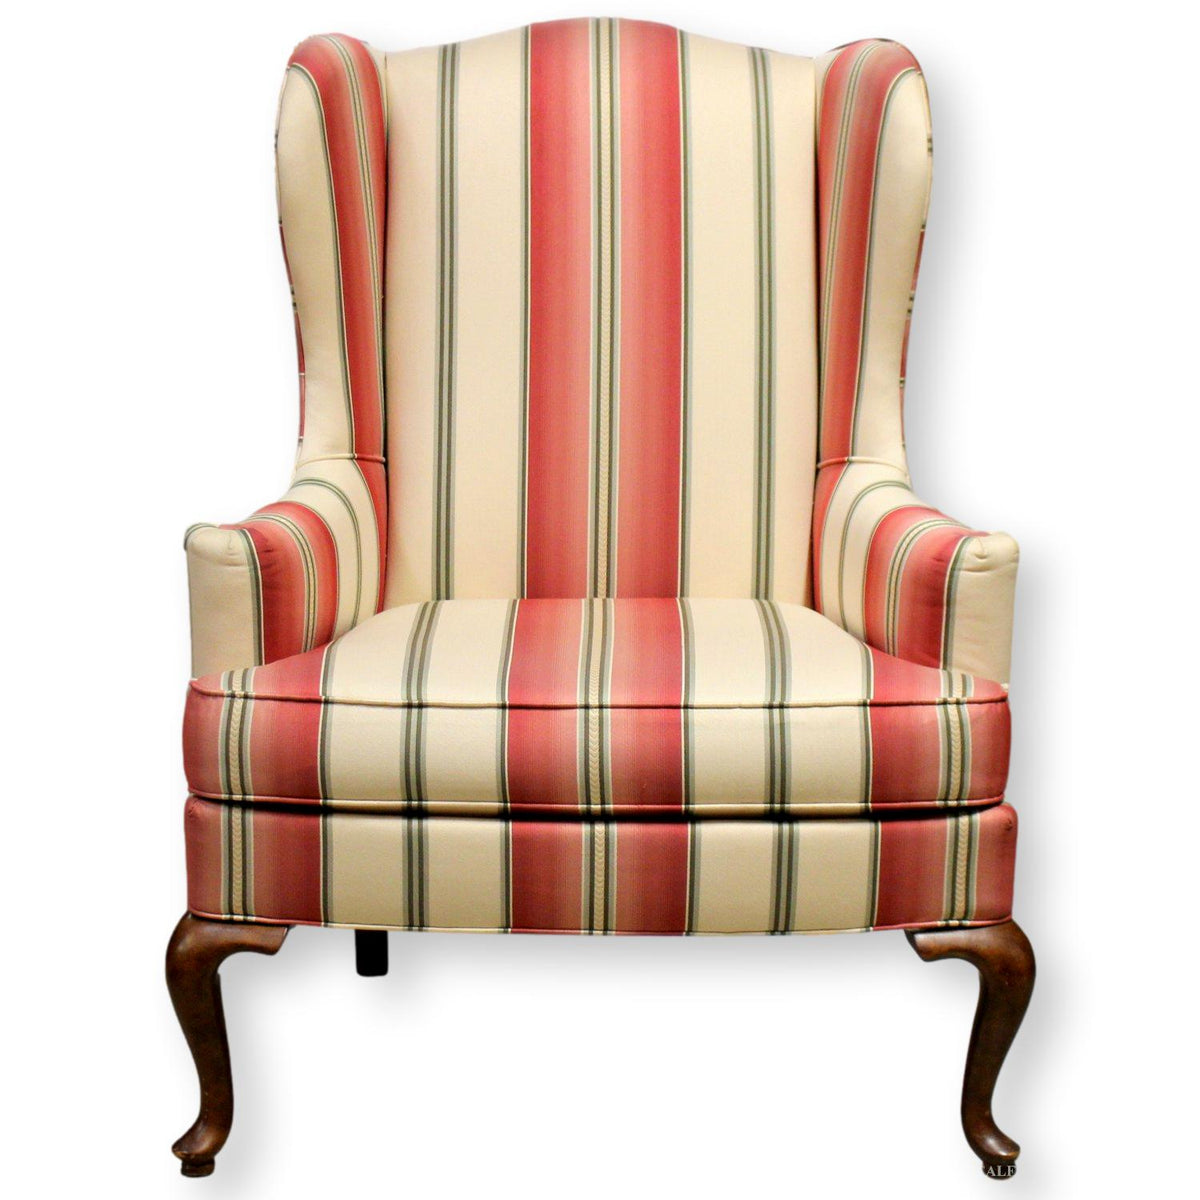 Drexel Heritage Striped Wingback Chair